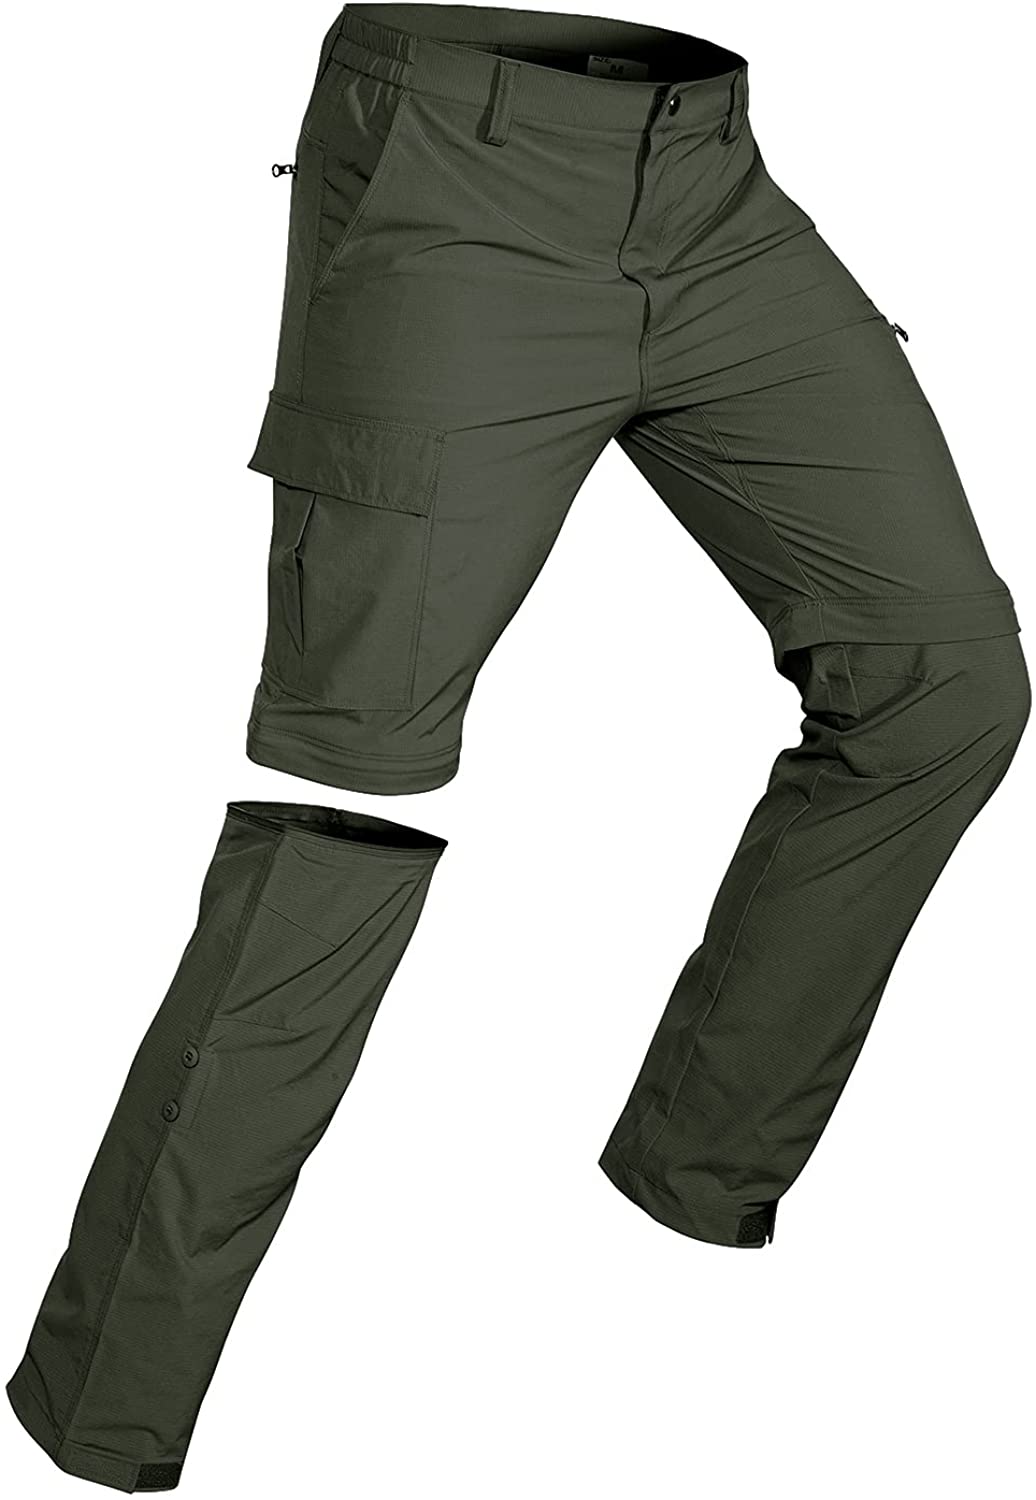 Wespornow Men's-Convertible-Hiking-Pants Quick Dry Lightweight Zip Off Breathable Cargo Pants for Outdoor, Fishing, Safari Army Green / 3X-Large